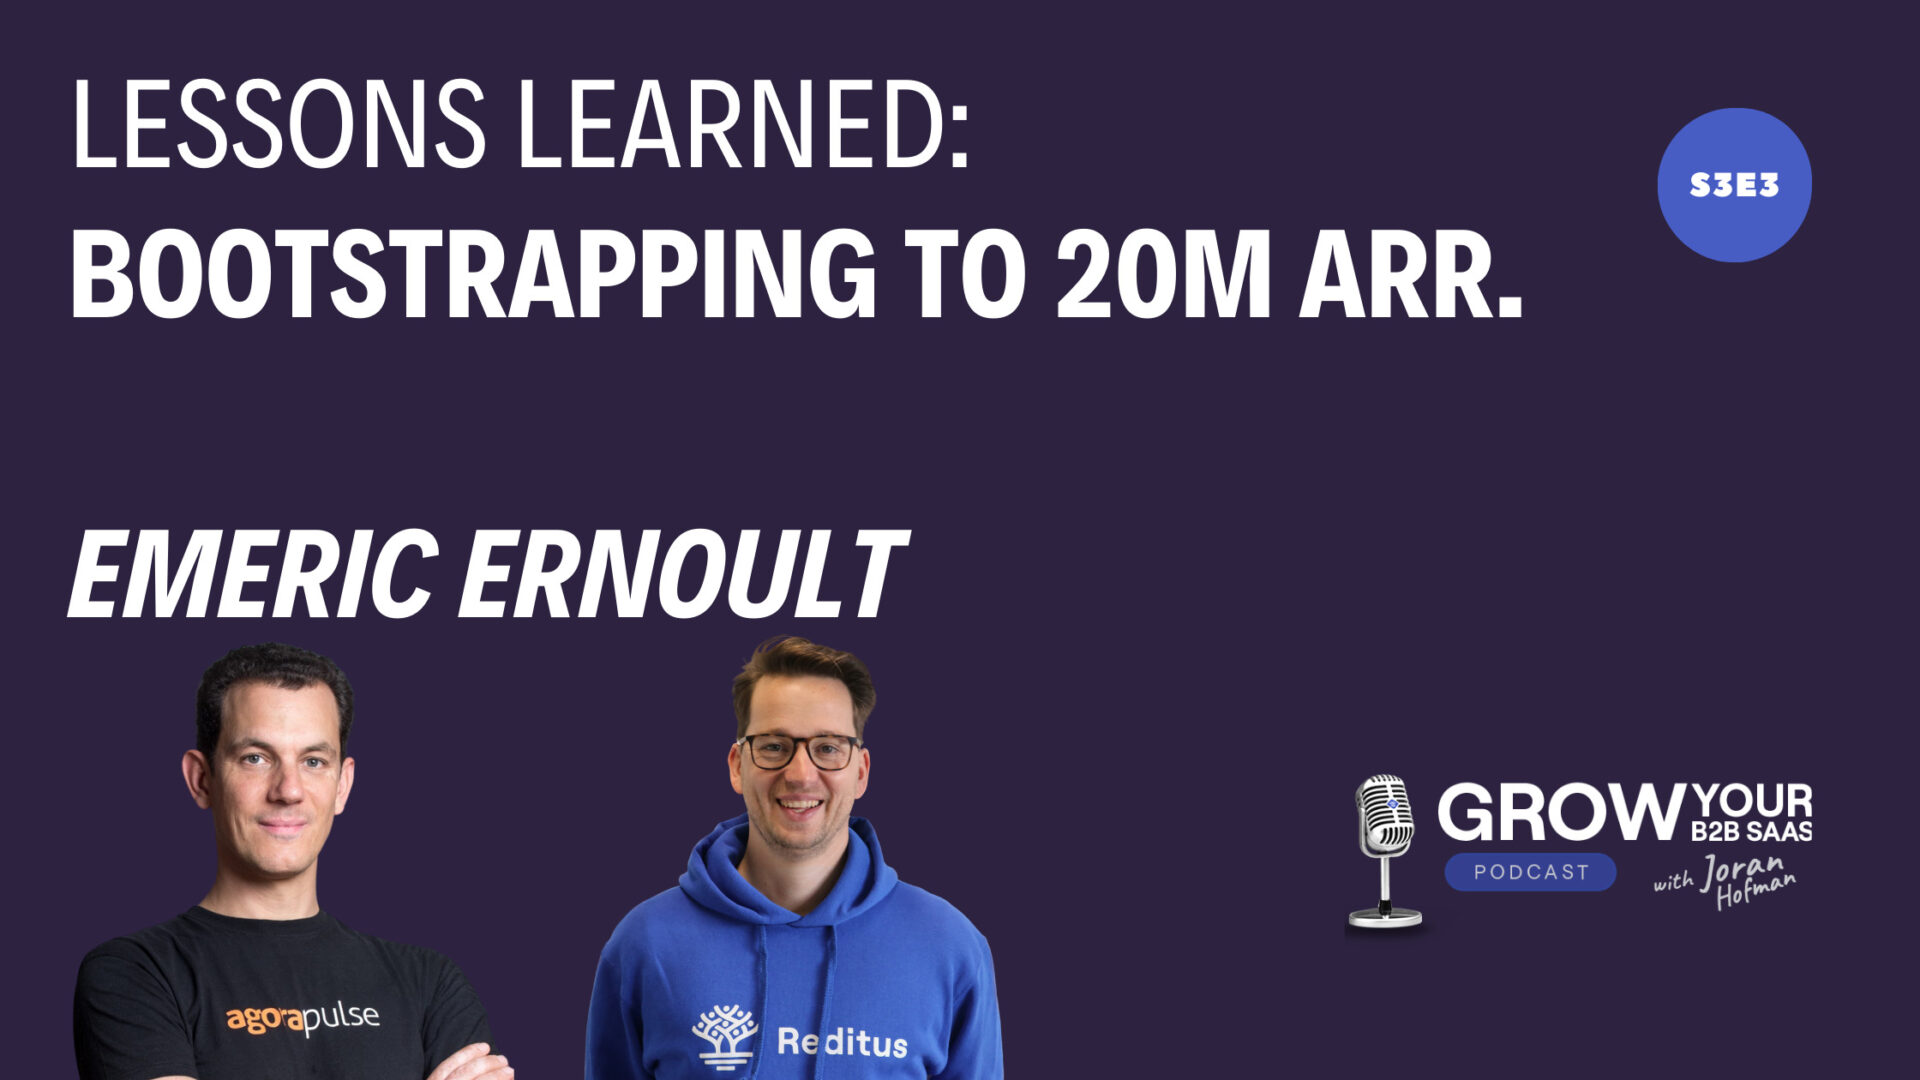 S3E3 – Lessons learned; Bootstrapping a B2B SaaS to 20M ARR in revenue With Emeric Ernoult